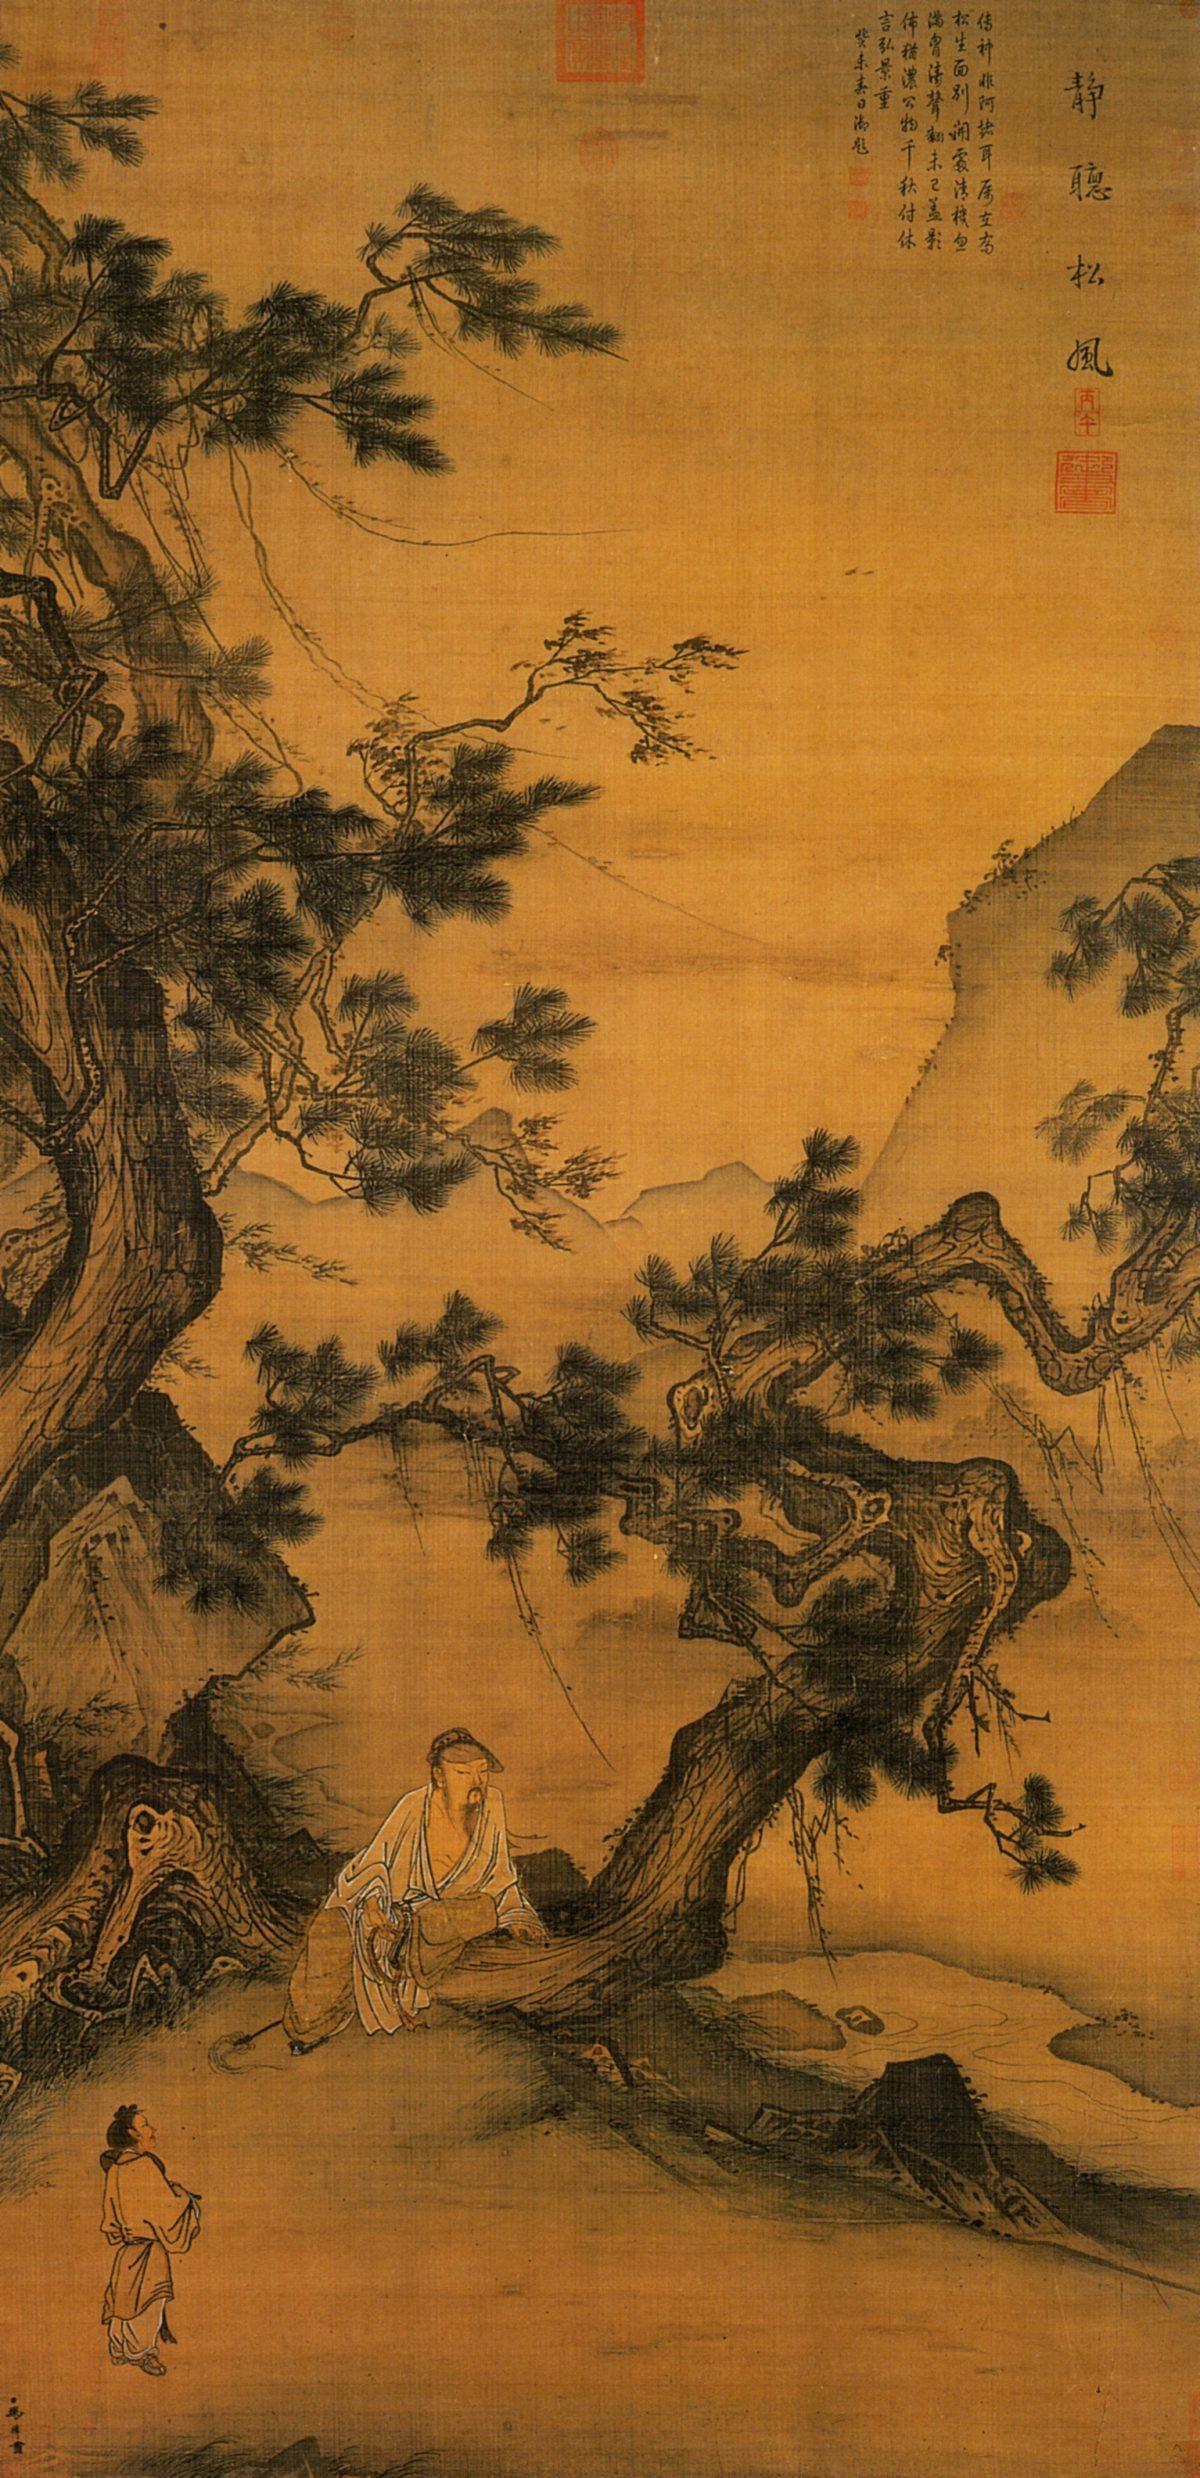 “Quietly Listening to Wind in the Pines,” 13th century before 1246, by Ma Lin. Hanging scroll. National Palace Museum, Taipei, Taiwan. (Public Domain)